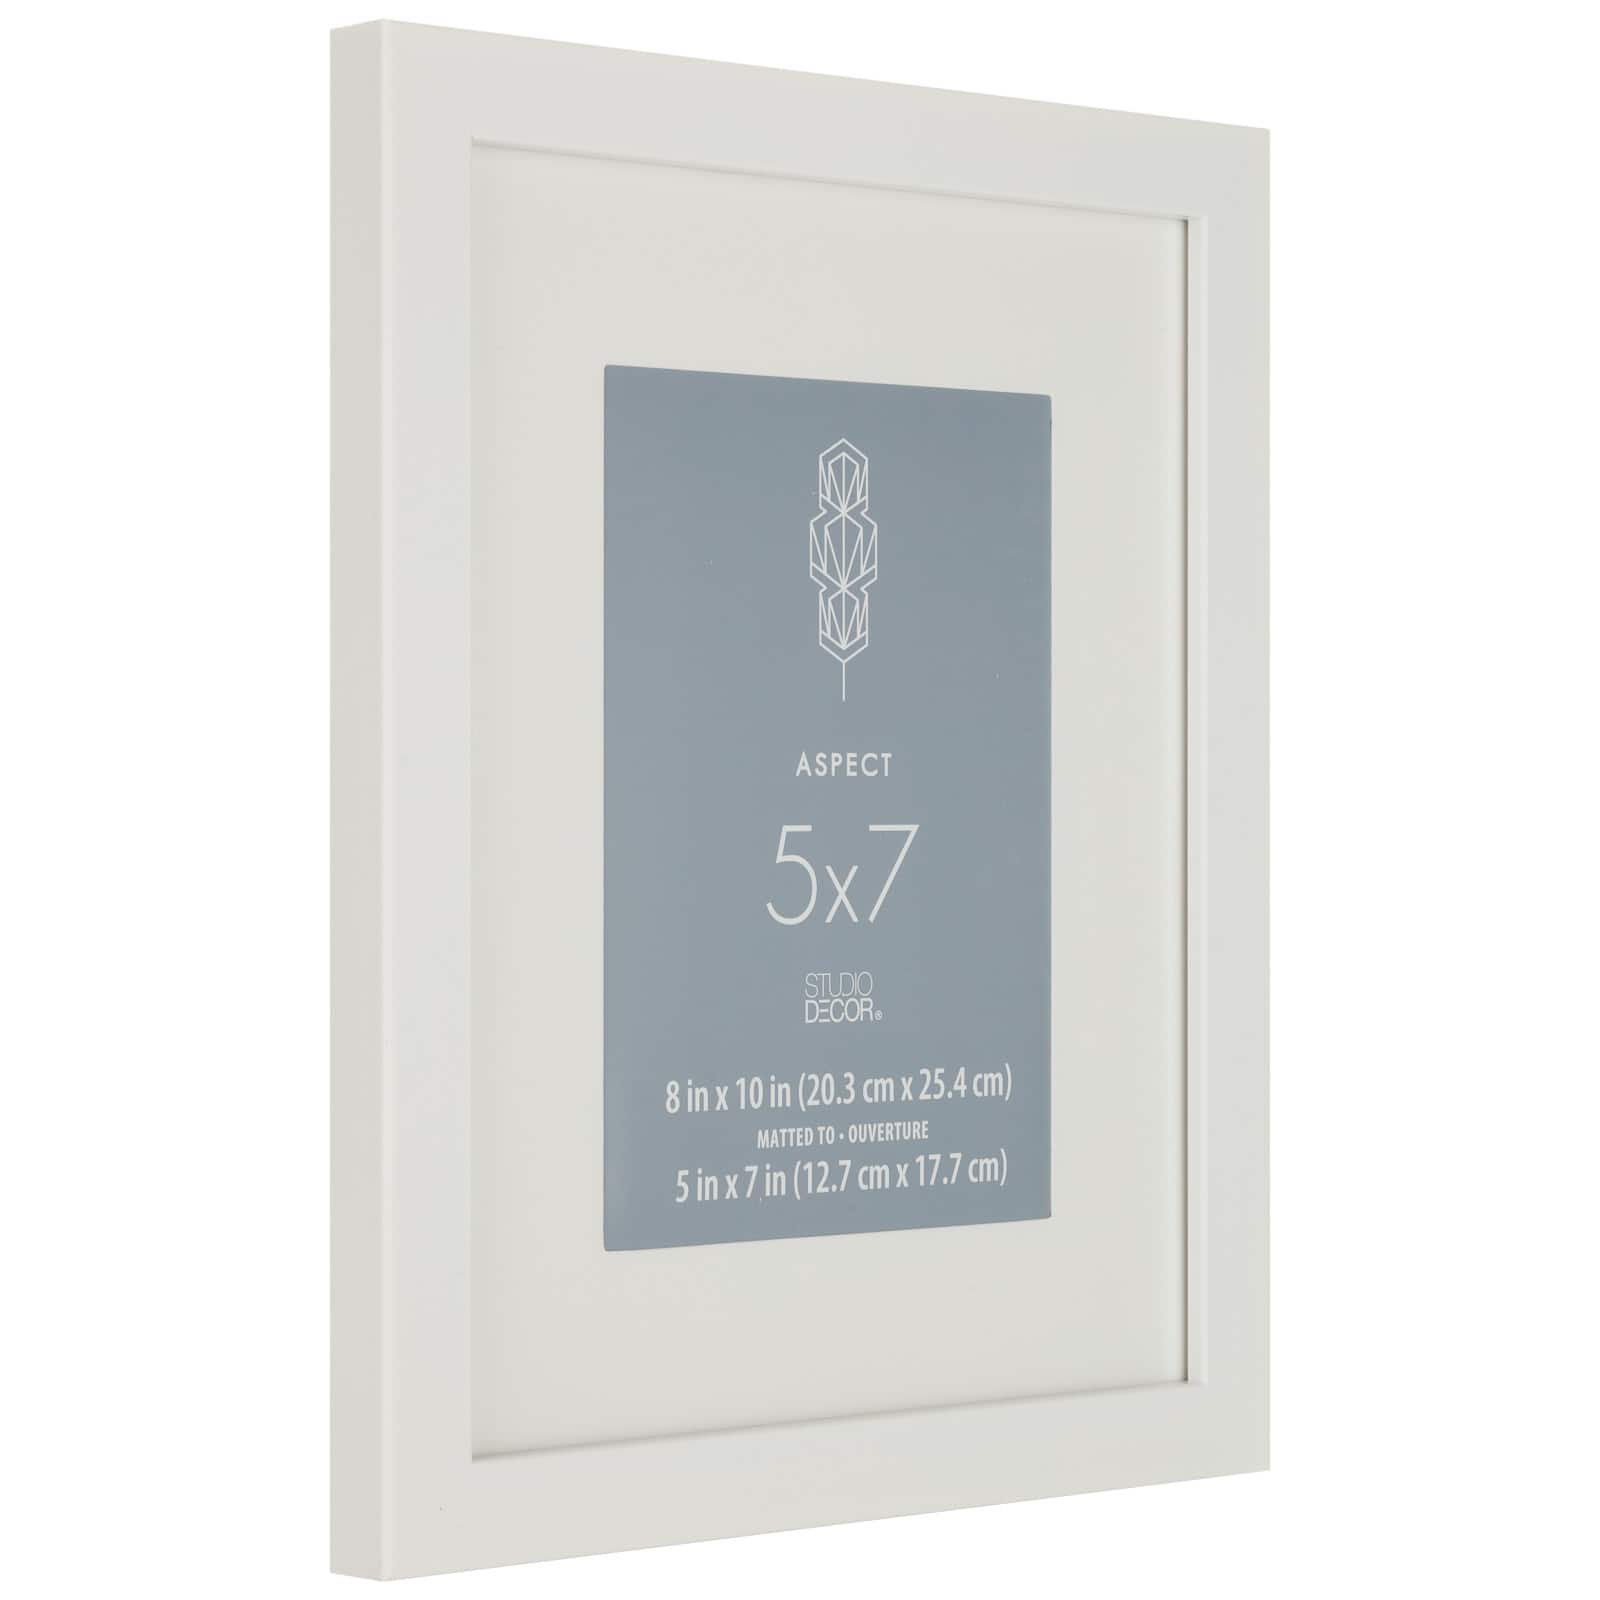 White Narrow Frame With Mat, Aspect By Studio D&#xE9;cor&#xAE;